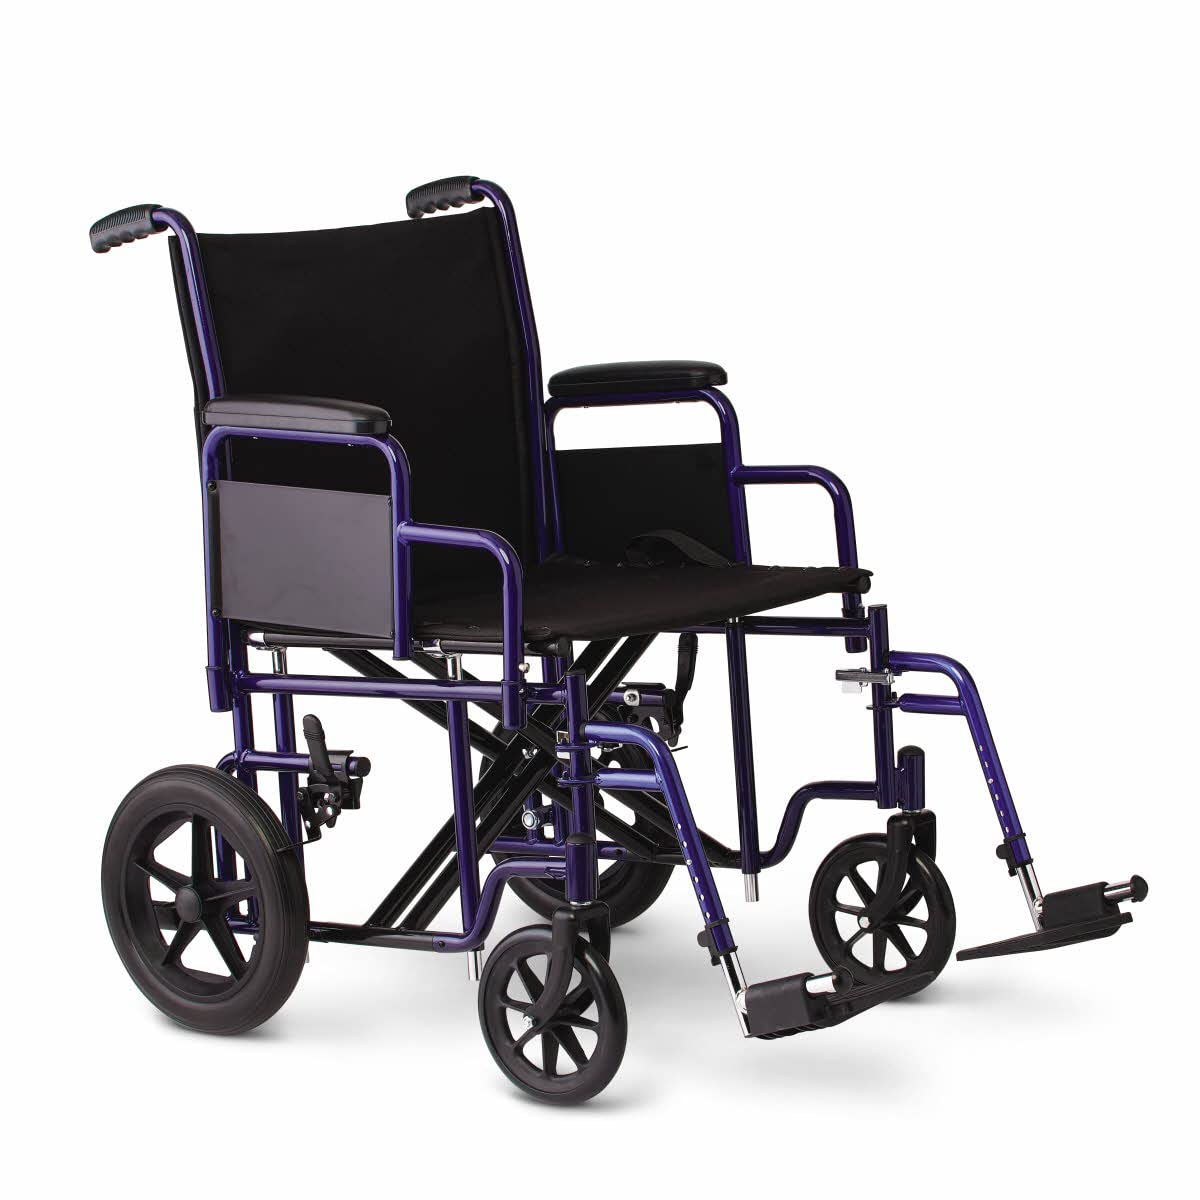 Medline Heavy Duty Transport Chair supports up to 500 lbs., Bariatric Transport Wheelchair, 22